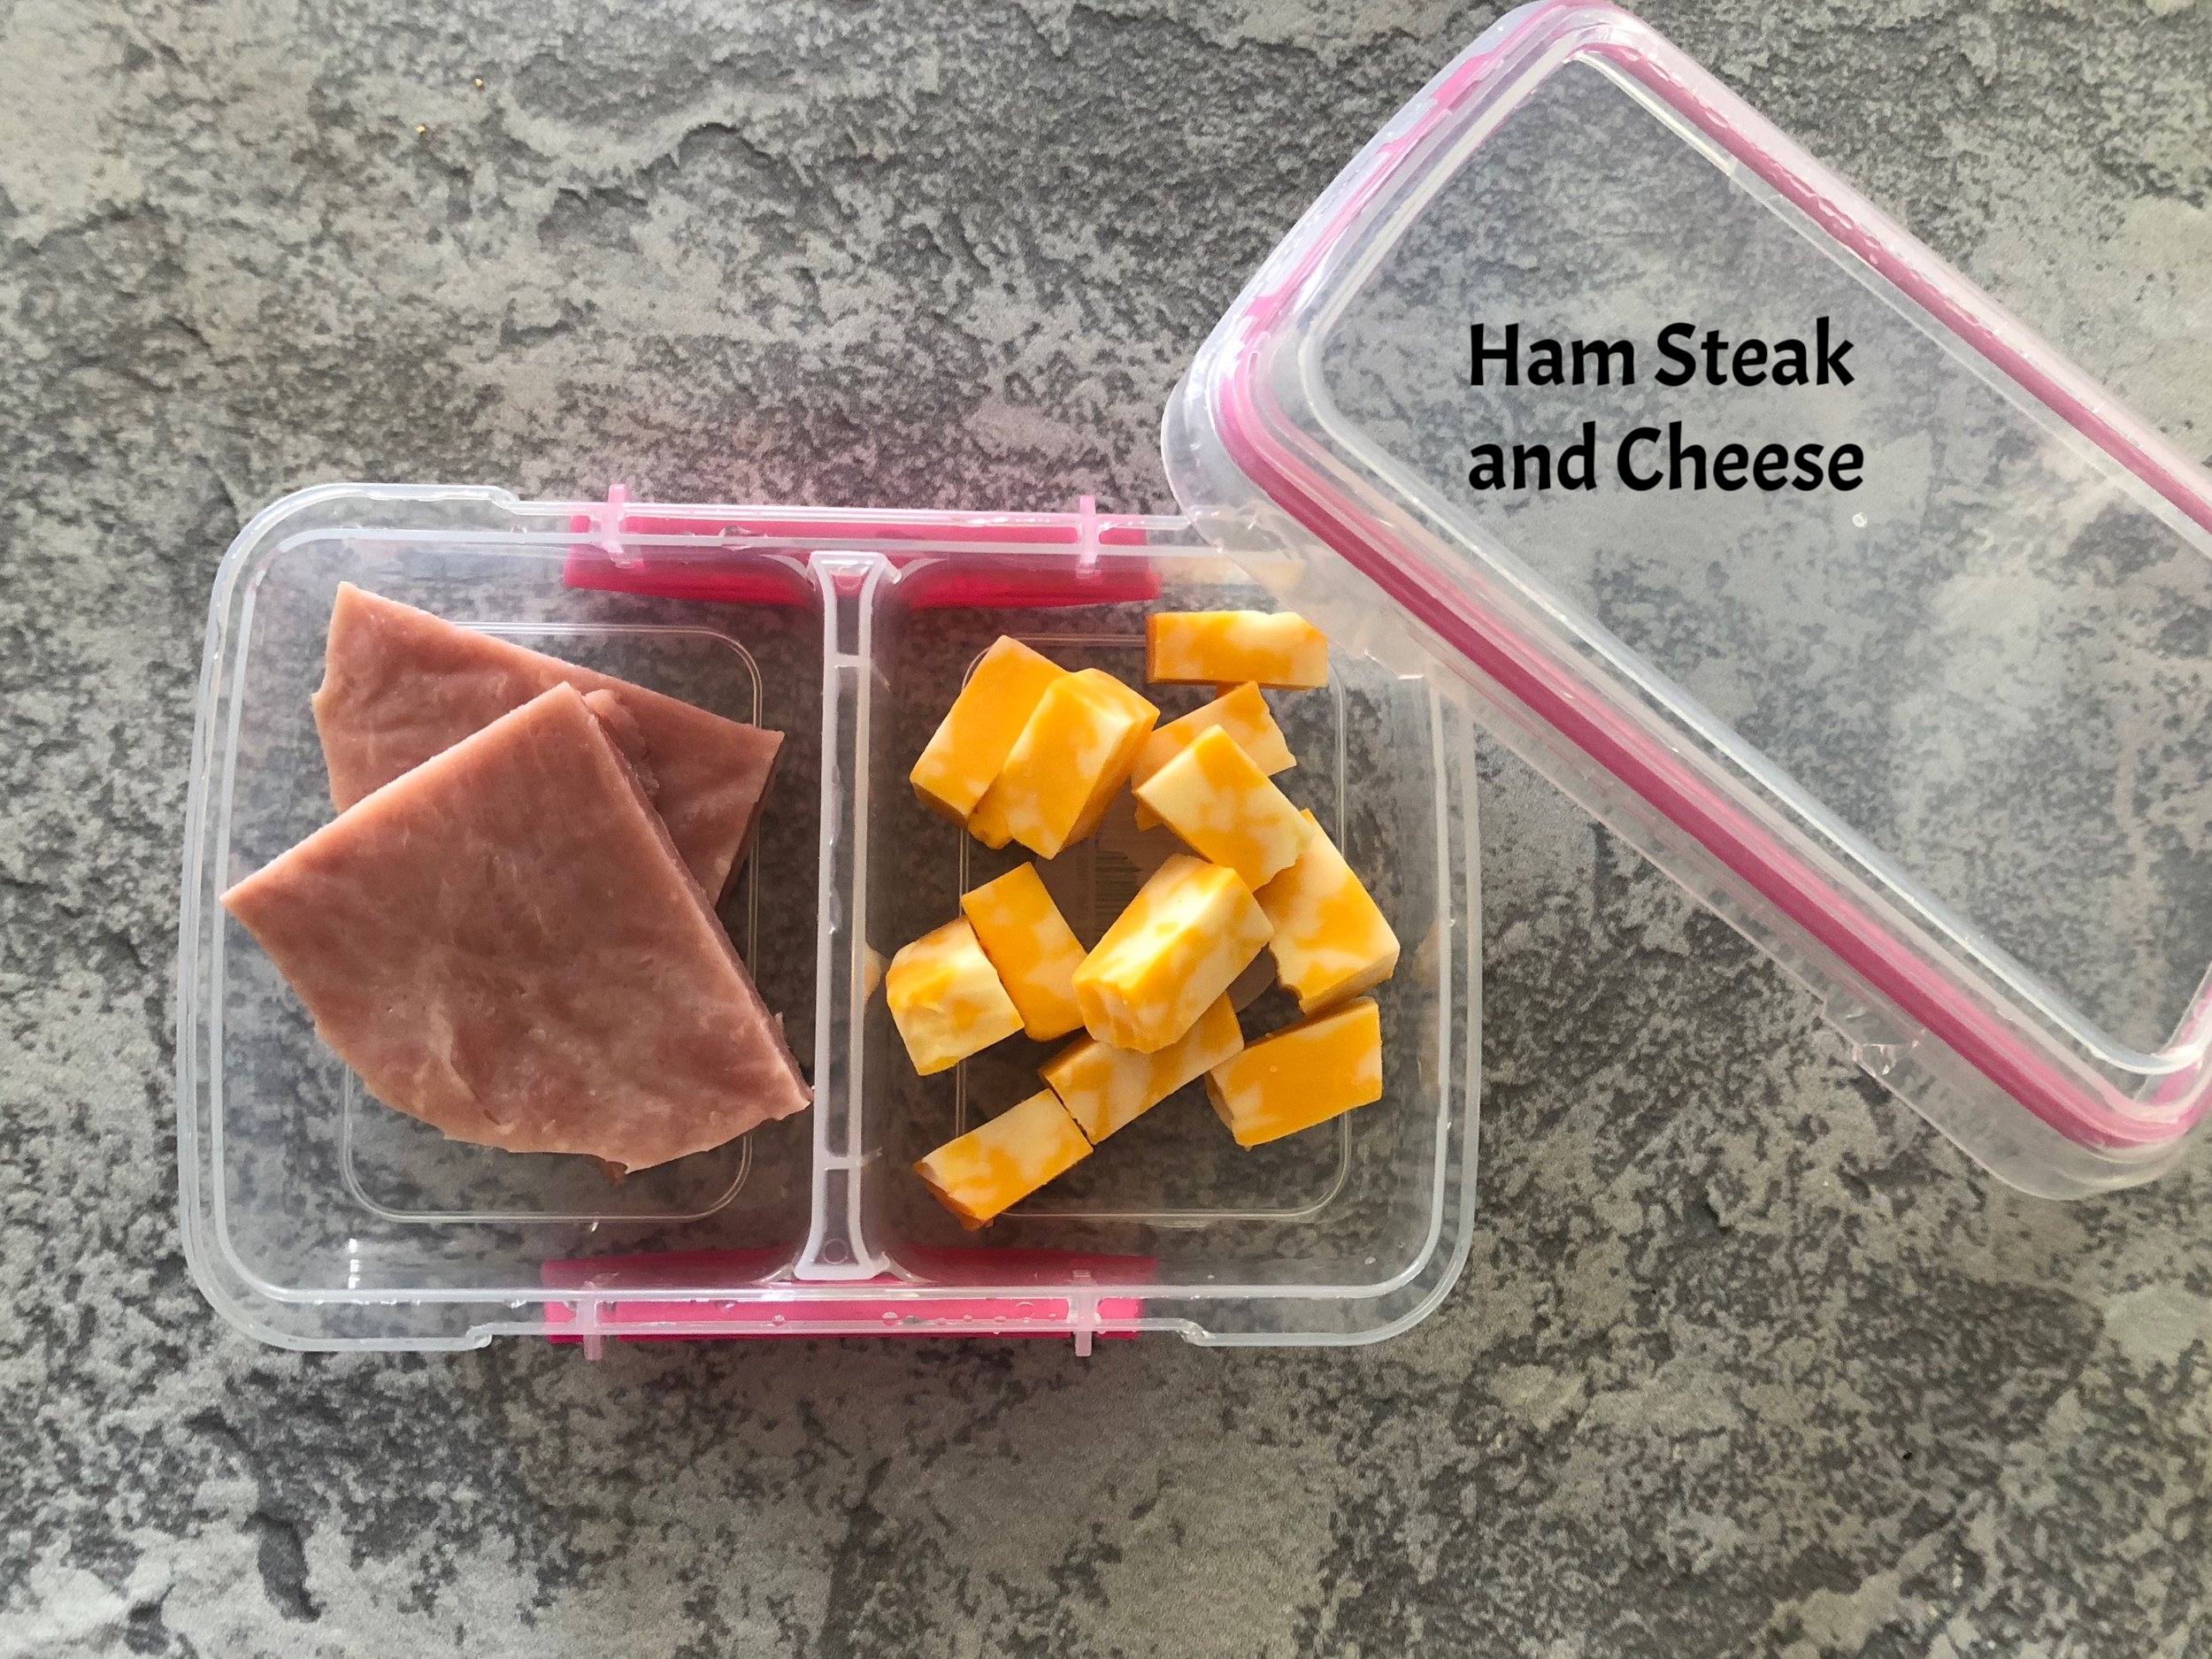 Lunch Ham Steak and Cheese Keto and Low Carb.jpg